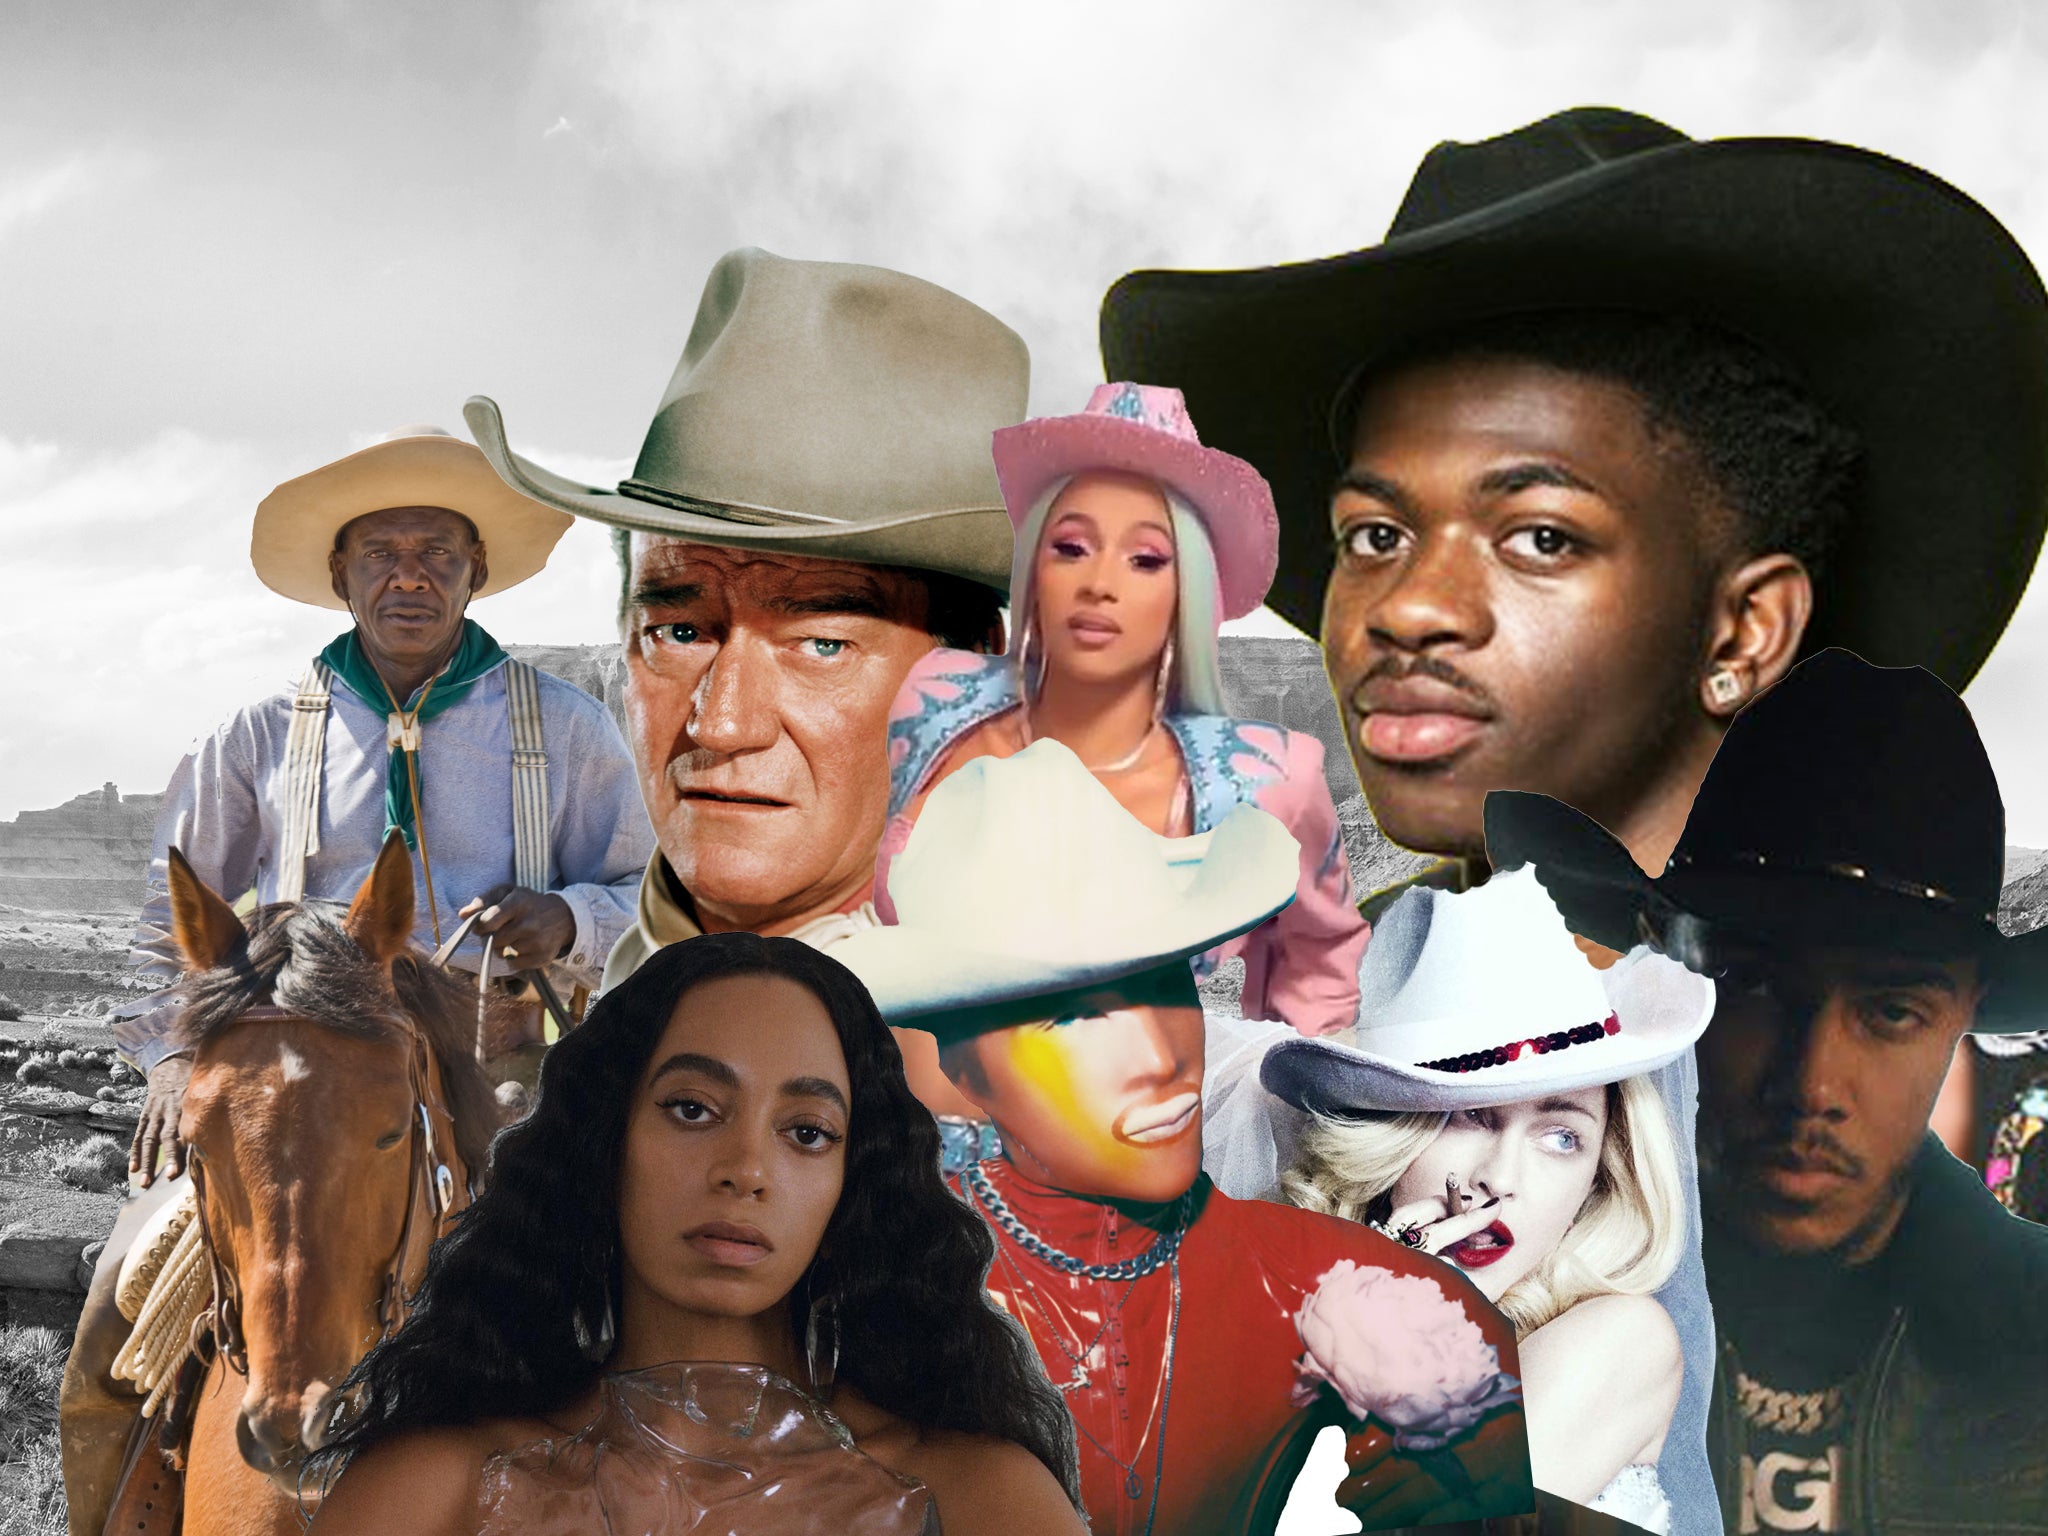 Return of the cowboy: How musicians in 2019 are rewriting an